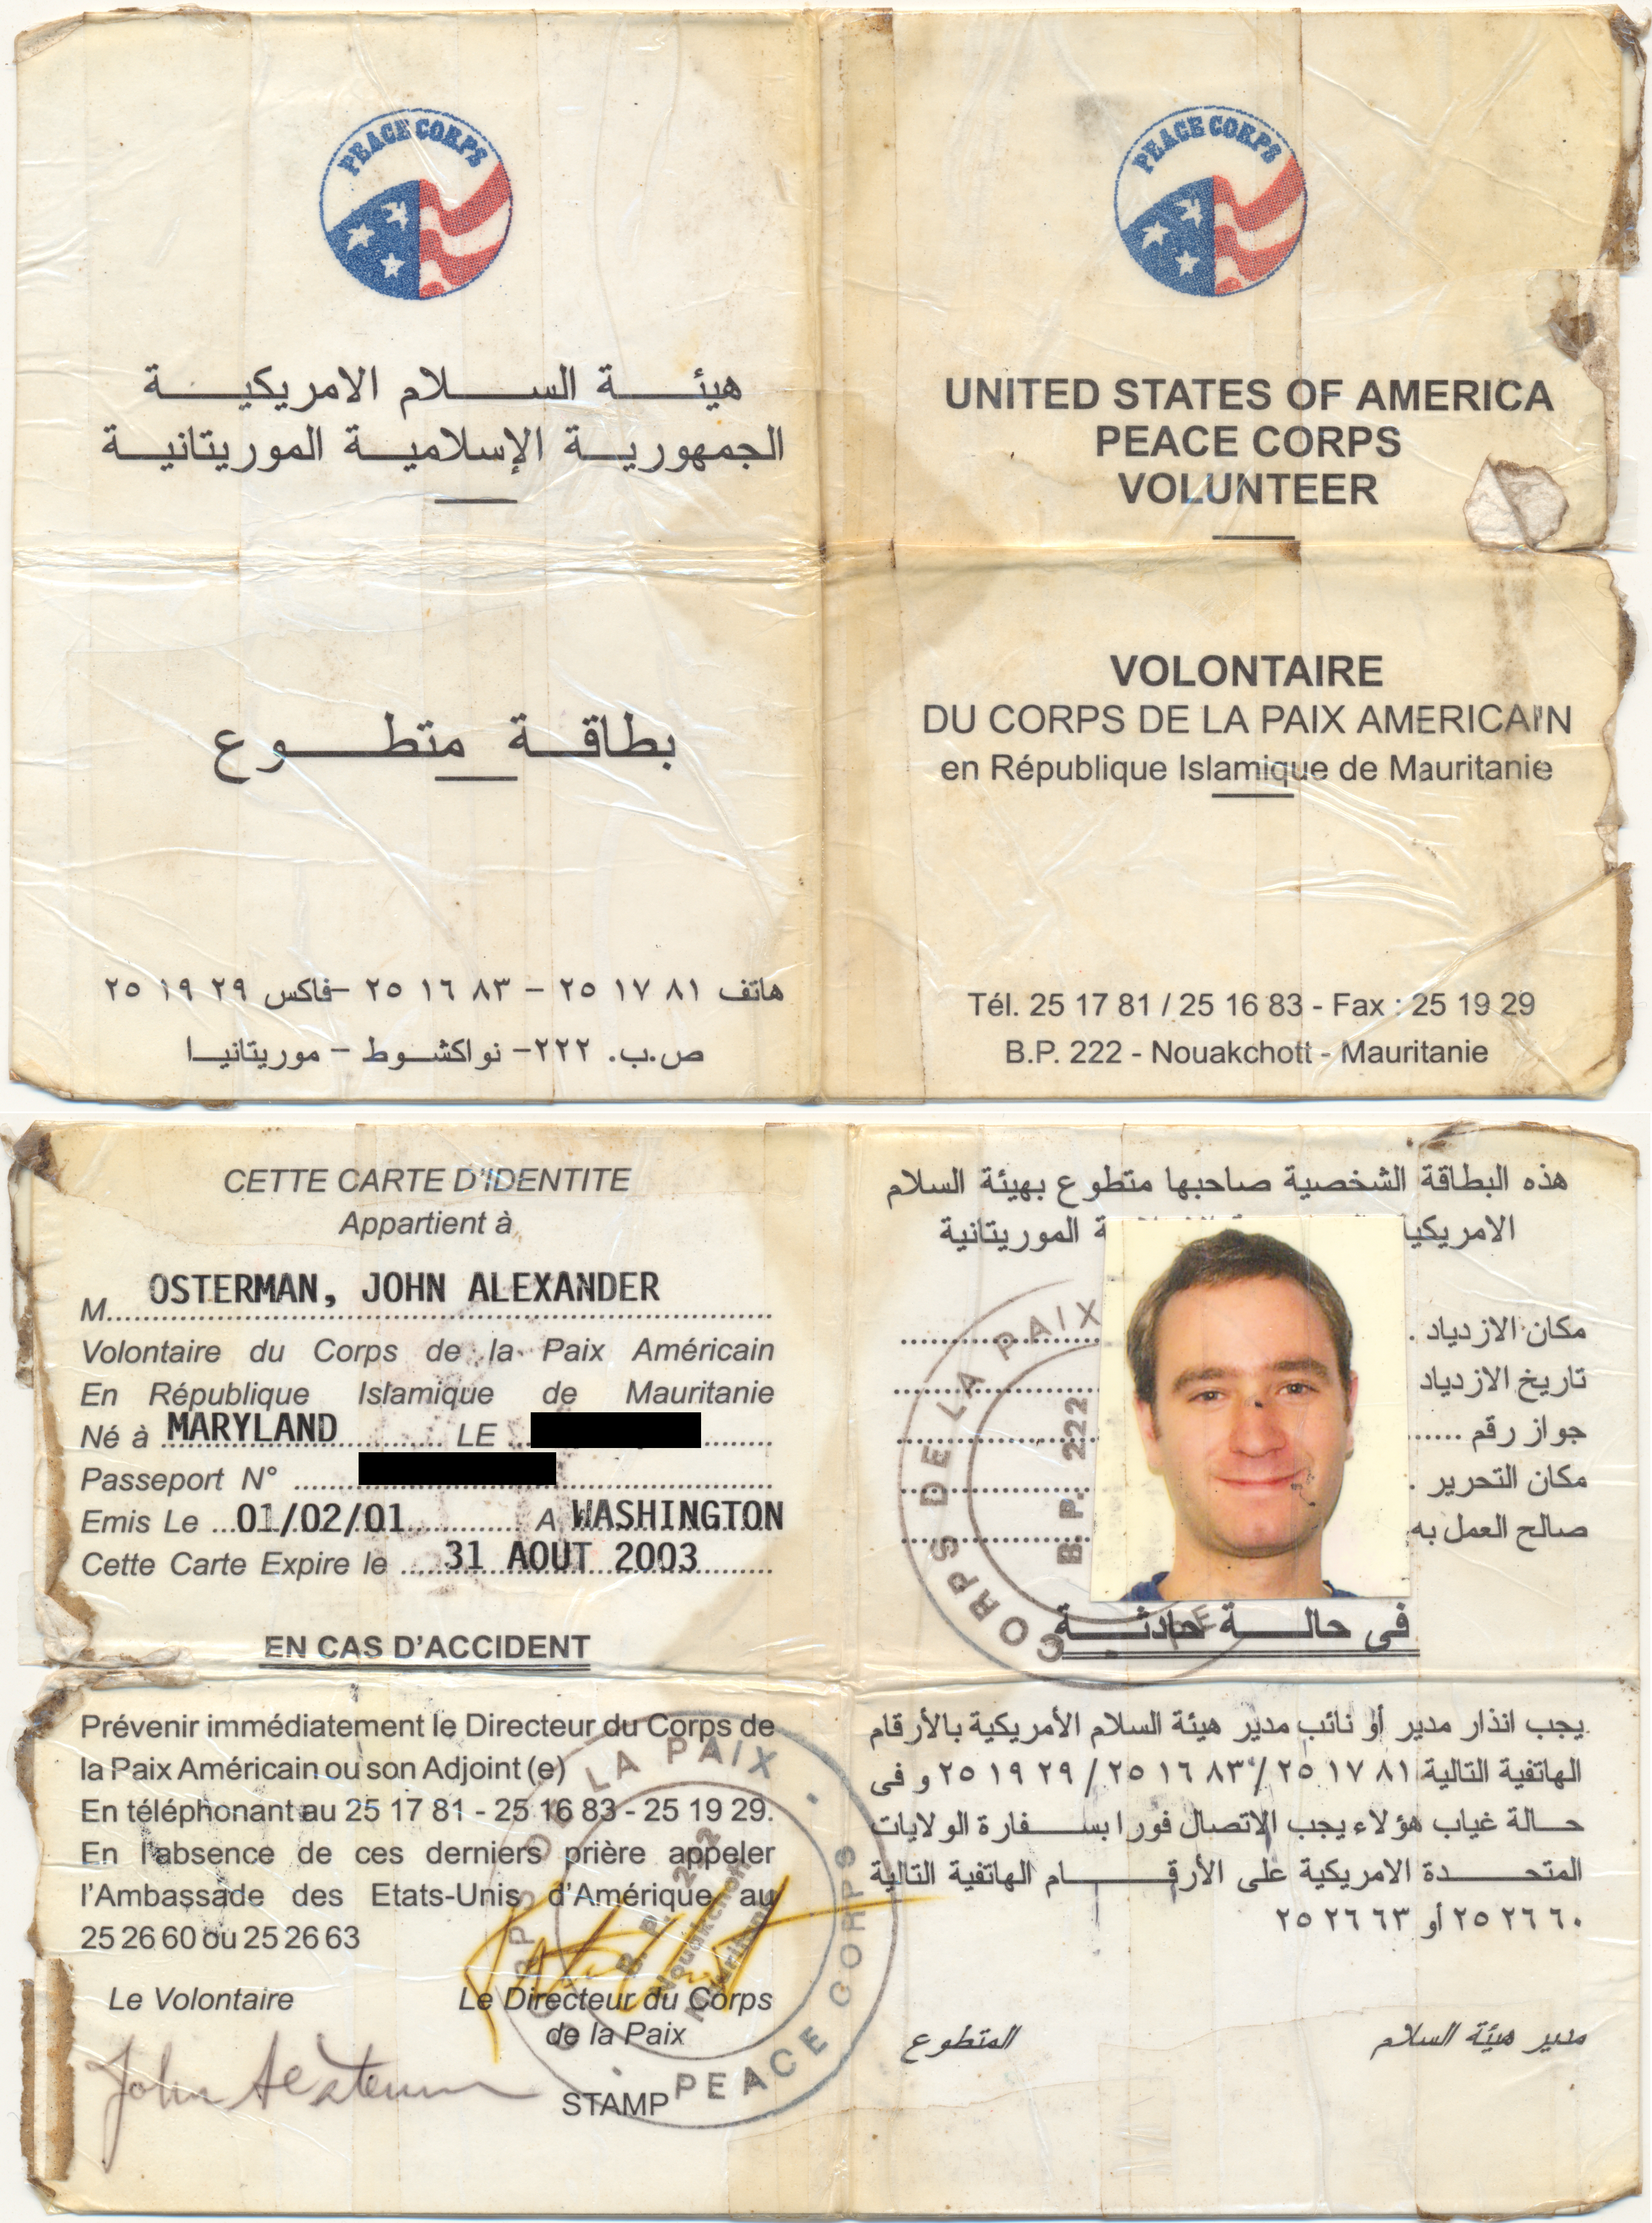 The inside and outside view of a four-page paper identification booklet. The upper-right panel reads 'United States of America Peace Corps Volunteer' in English and French. The upper-left panel shows the same in Arabic. The lower panels, the inside of the booklet, have identity information, emergency contacts, and a passport photo.